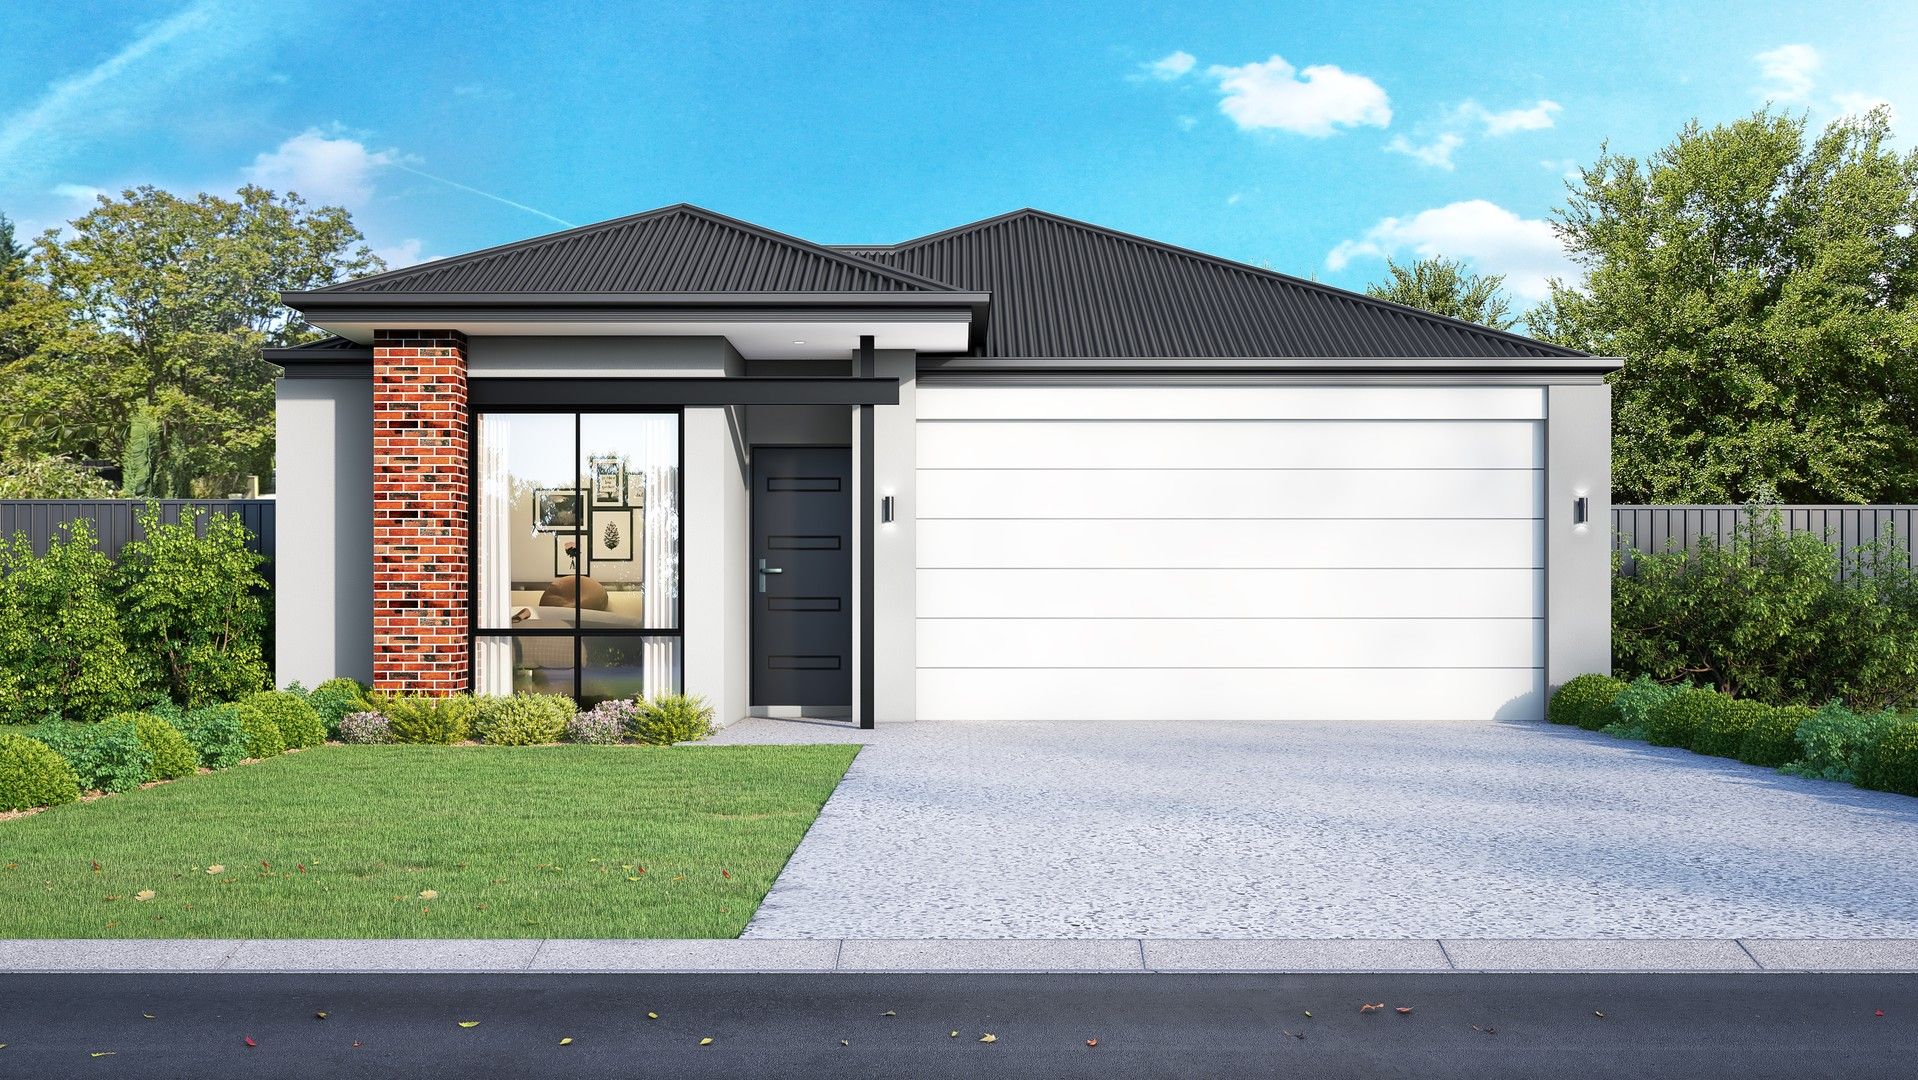 4 bedrooms New House & Land in  CLARKSON WA, 6030